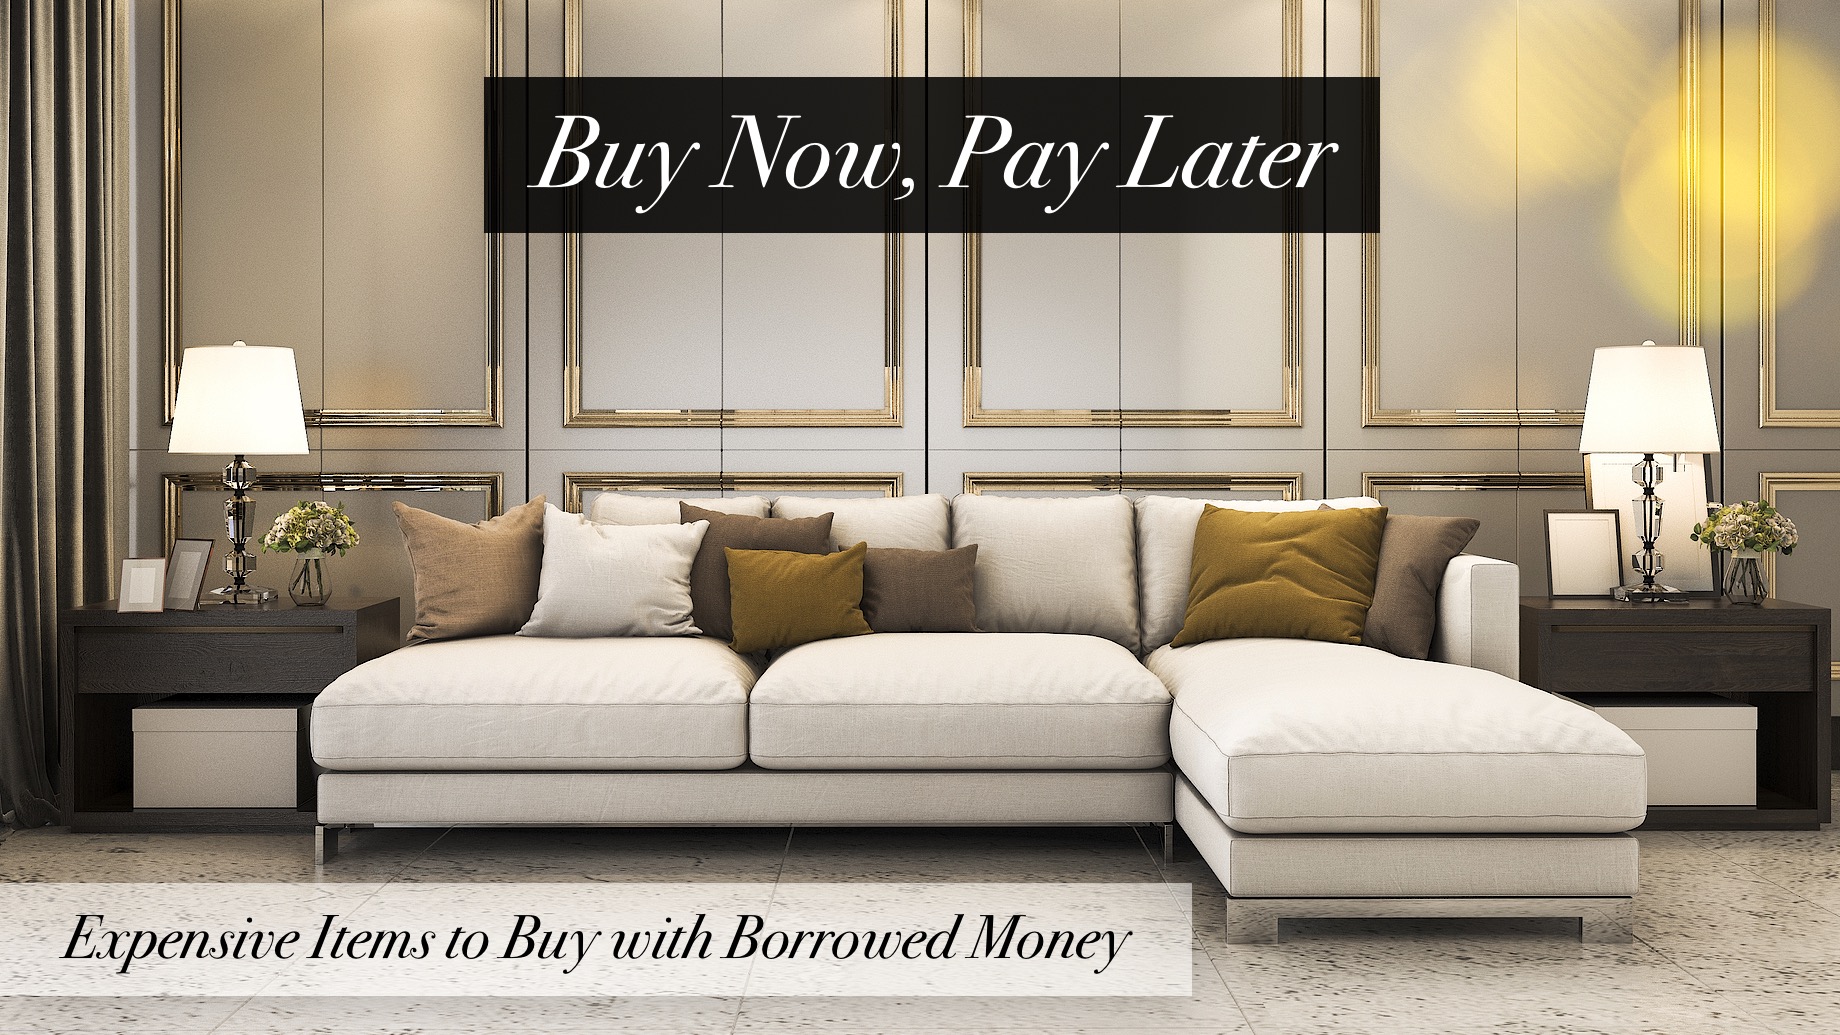 Buy Now, Pay Later - Expensive Items to Buy with Borrowed Money